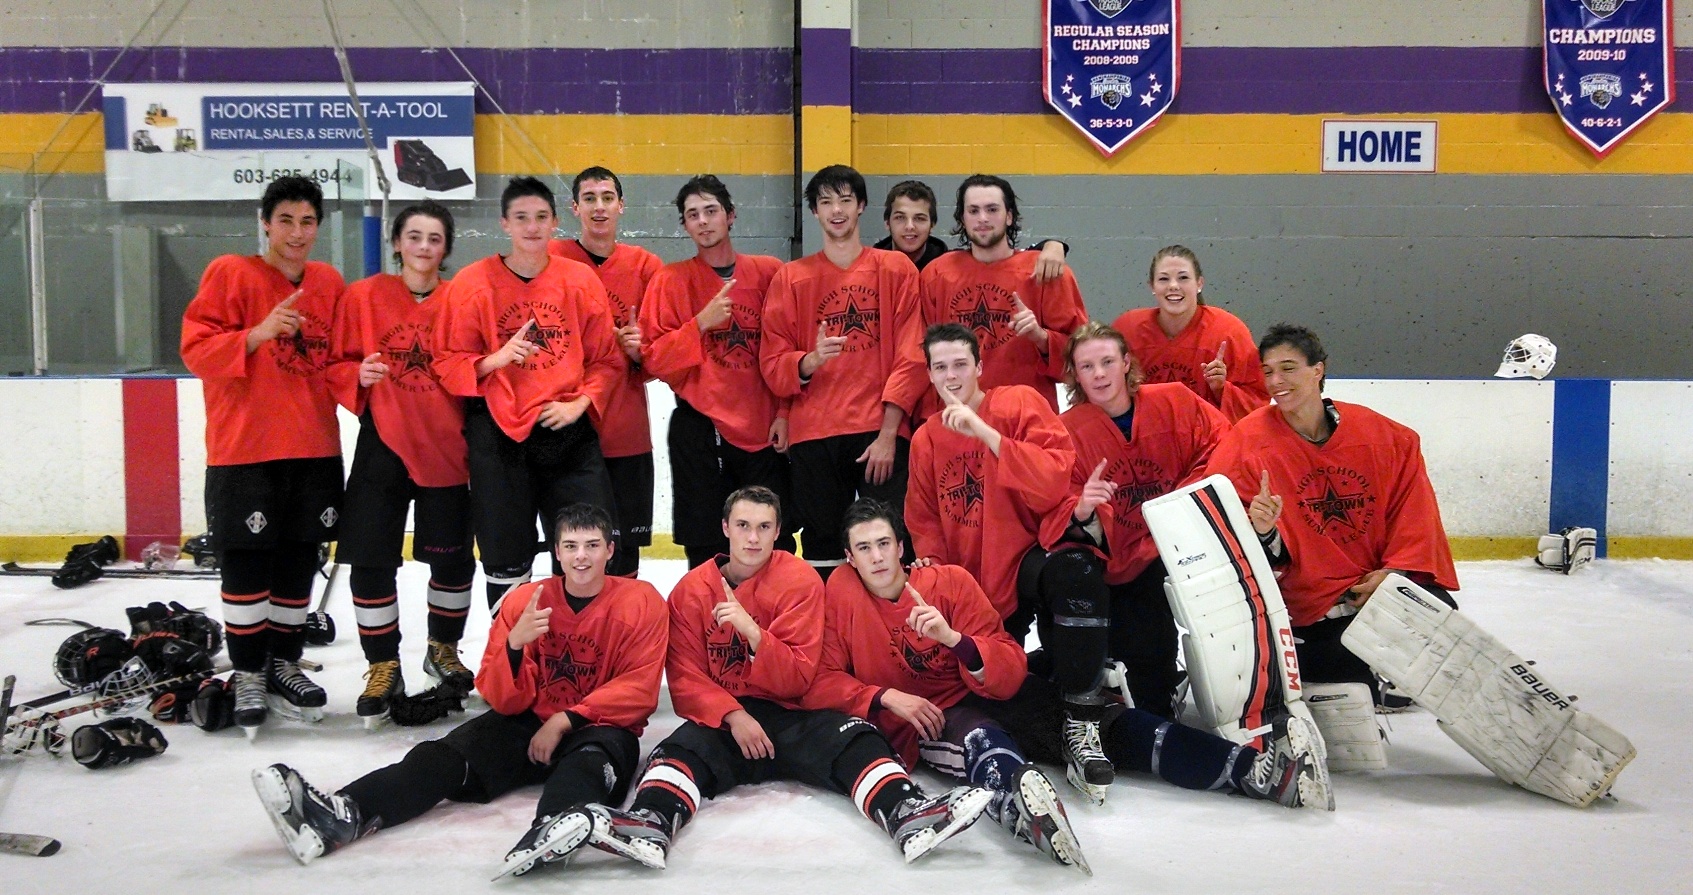 After four summers of high school boys hockey in Hooksett, New Hampshire, a championship win